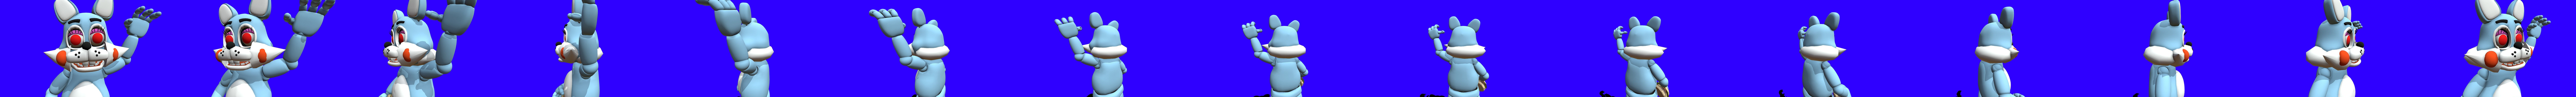 Five nights at Candy's - LowPoly CandytheCat model by BaxtheBat on